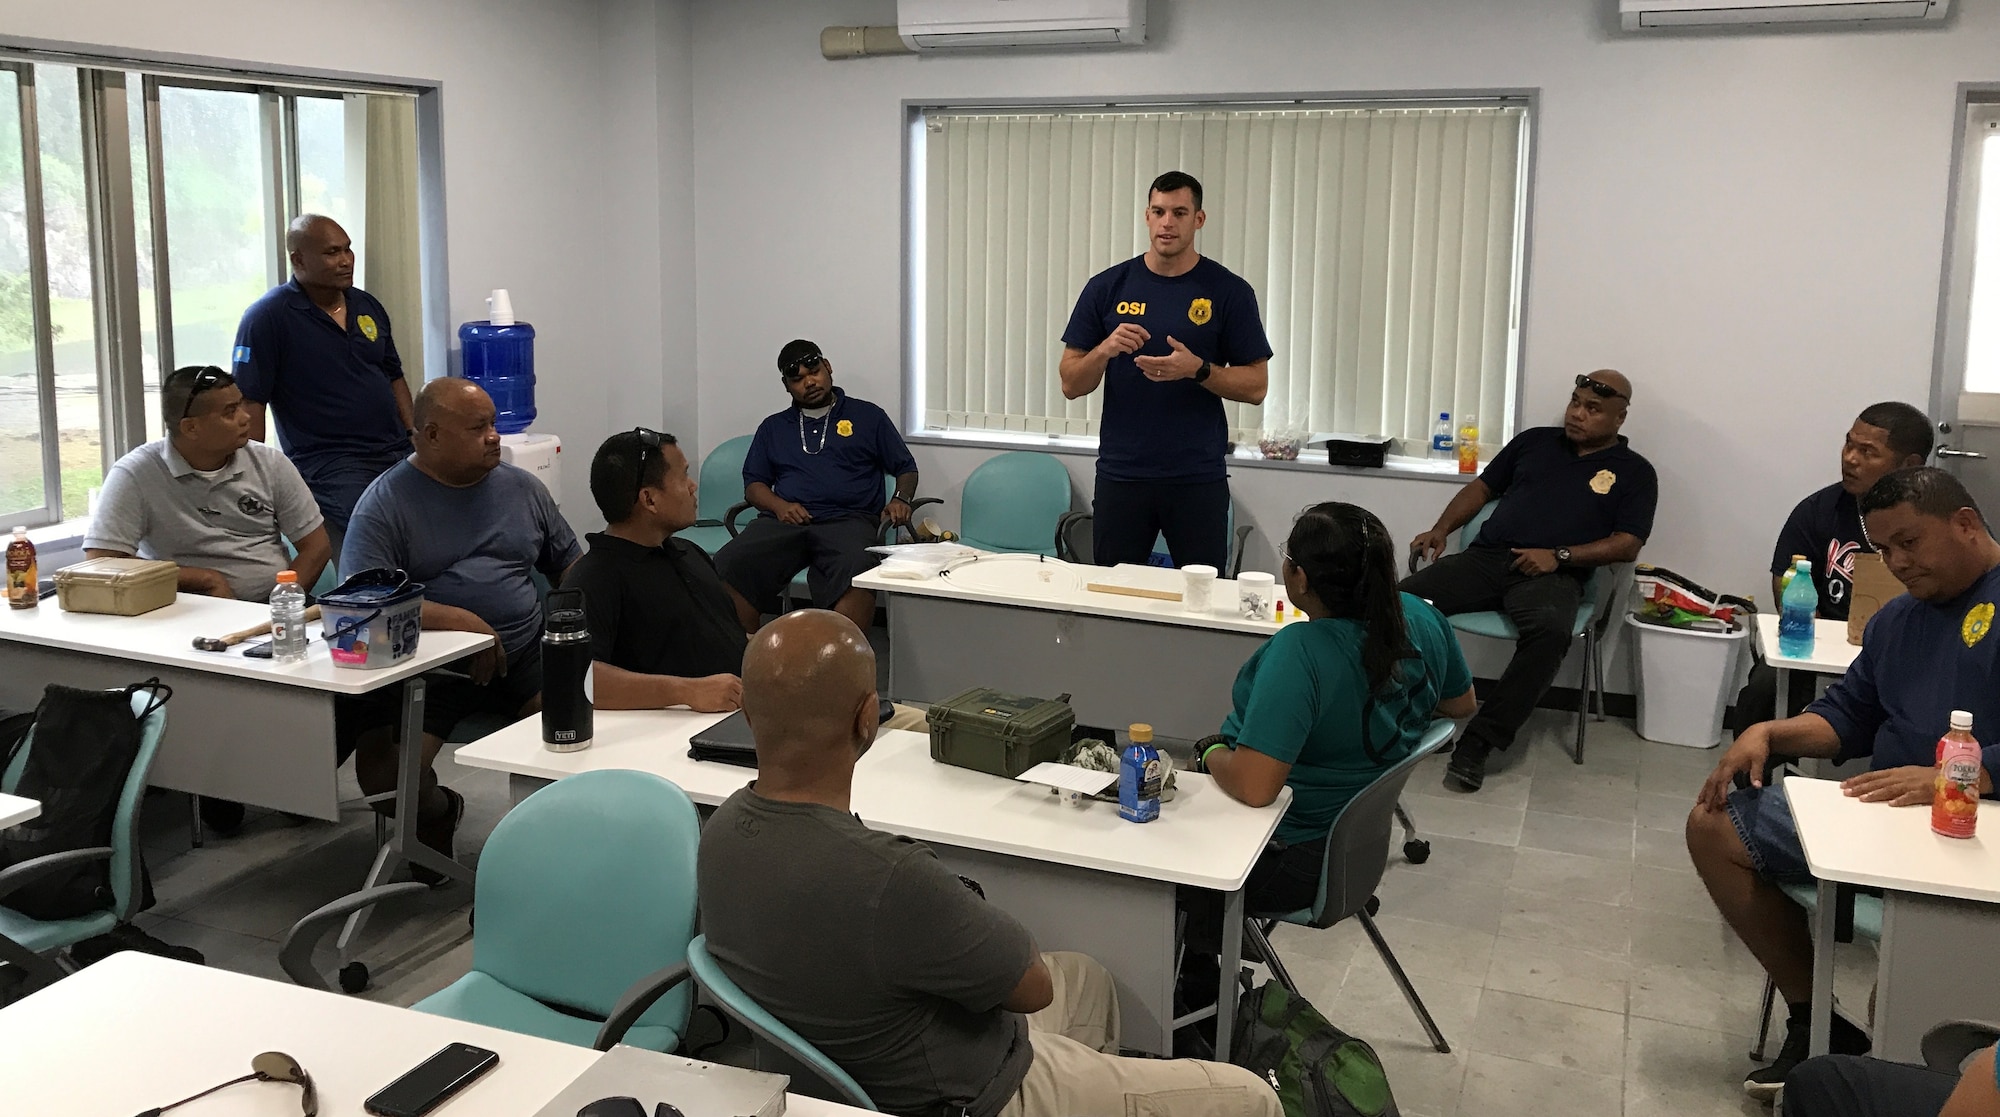 Special Agent Jefferson Fraser conducts a classroom session in Palau as part of the AFOSI Region 6 Special Missions Branch Law Enforcement Investigative Skills Exchange Program with Indo-Pacific partners July 17-19 and 24-26, 2019. (Photo submitted by 6 FIR/SMB)